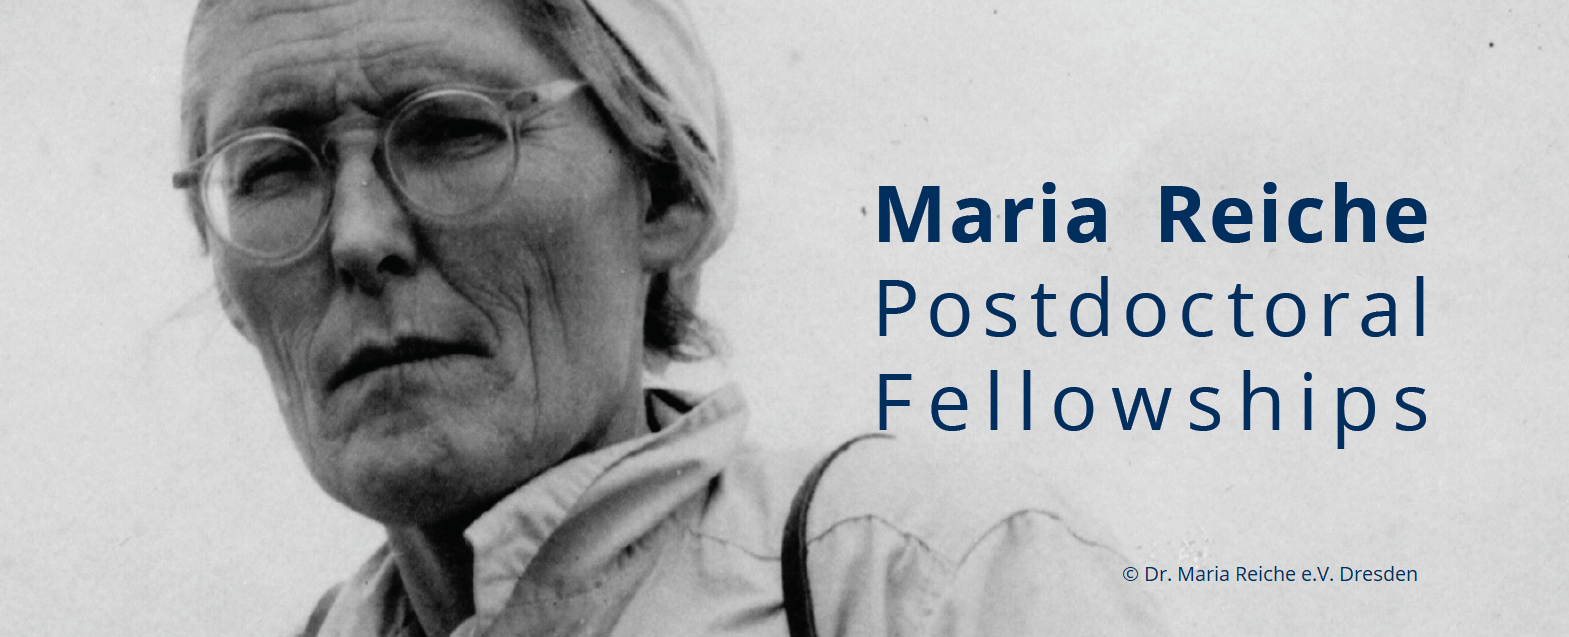 Maria Reiche Postdoctoral Fellowships for early-career female researchers at TU Dresden